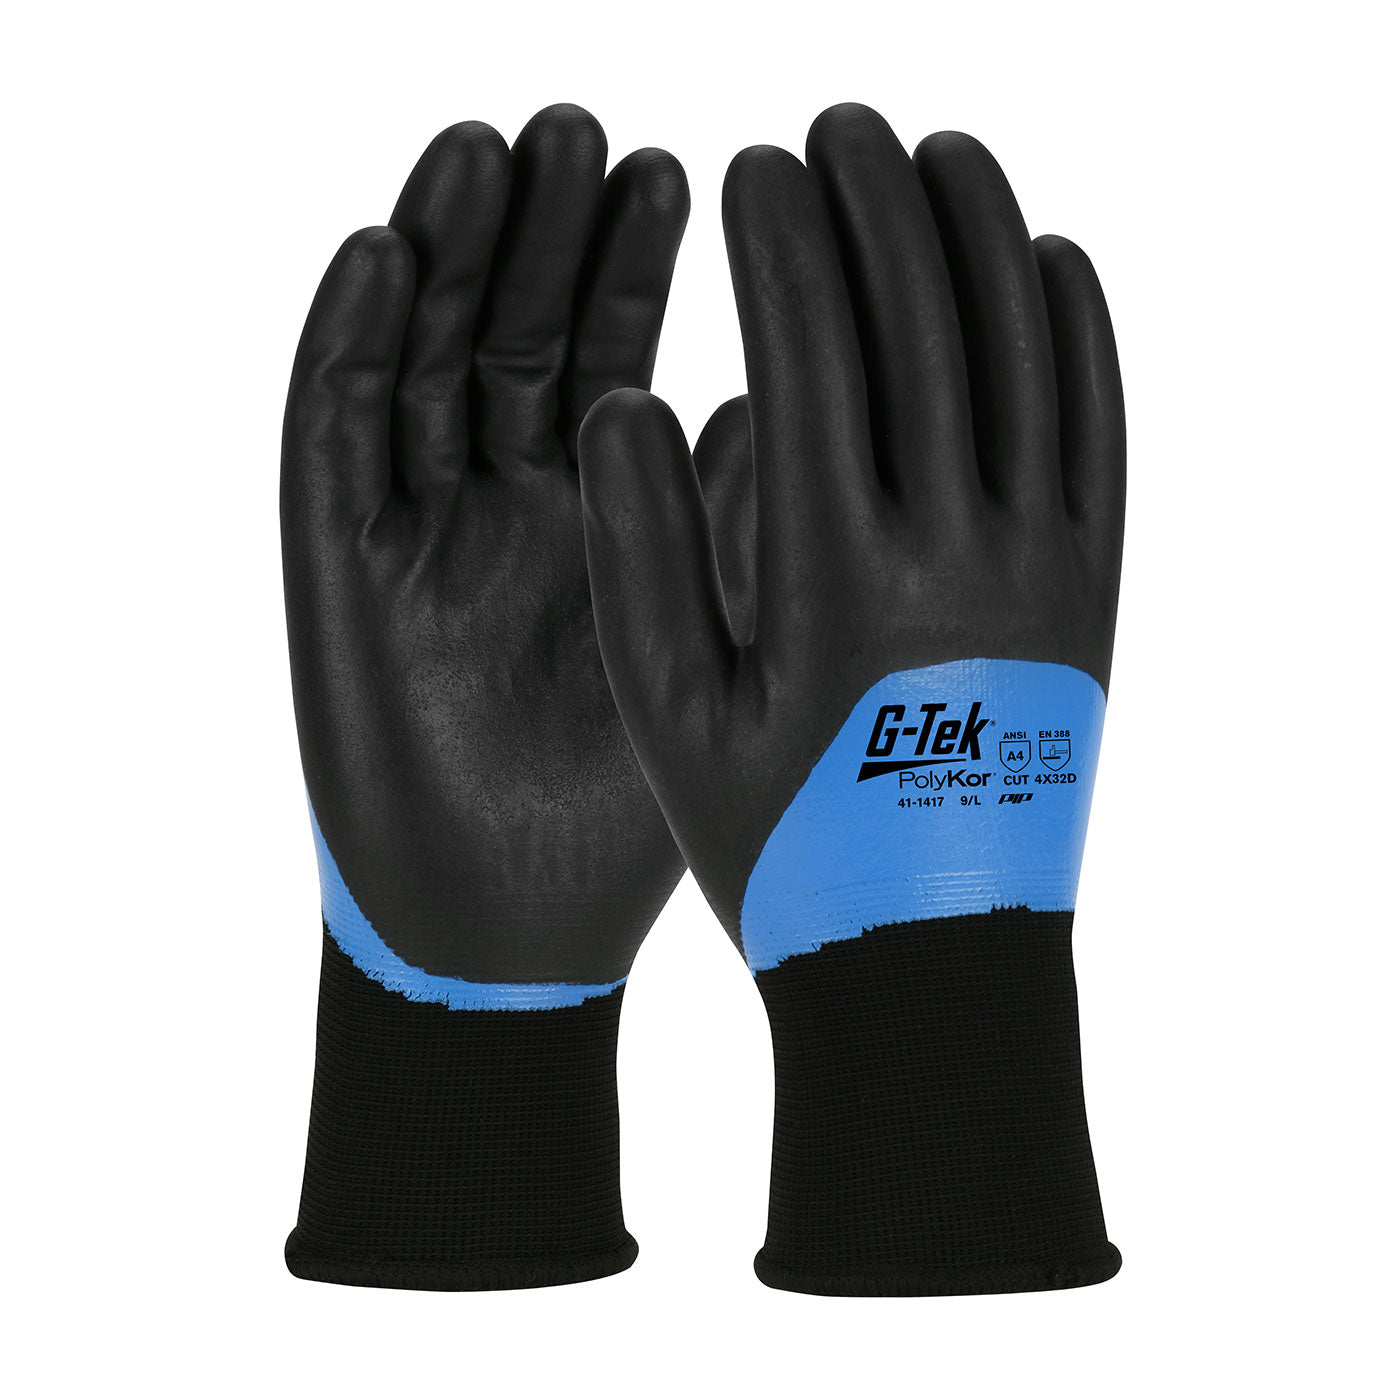 Seamless Knit PolyKor Blend Glove with Acrylic Liner and Double-Dipped Nitrile Foam Grip on Full Hand-eSafety Supplies, Inc